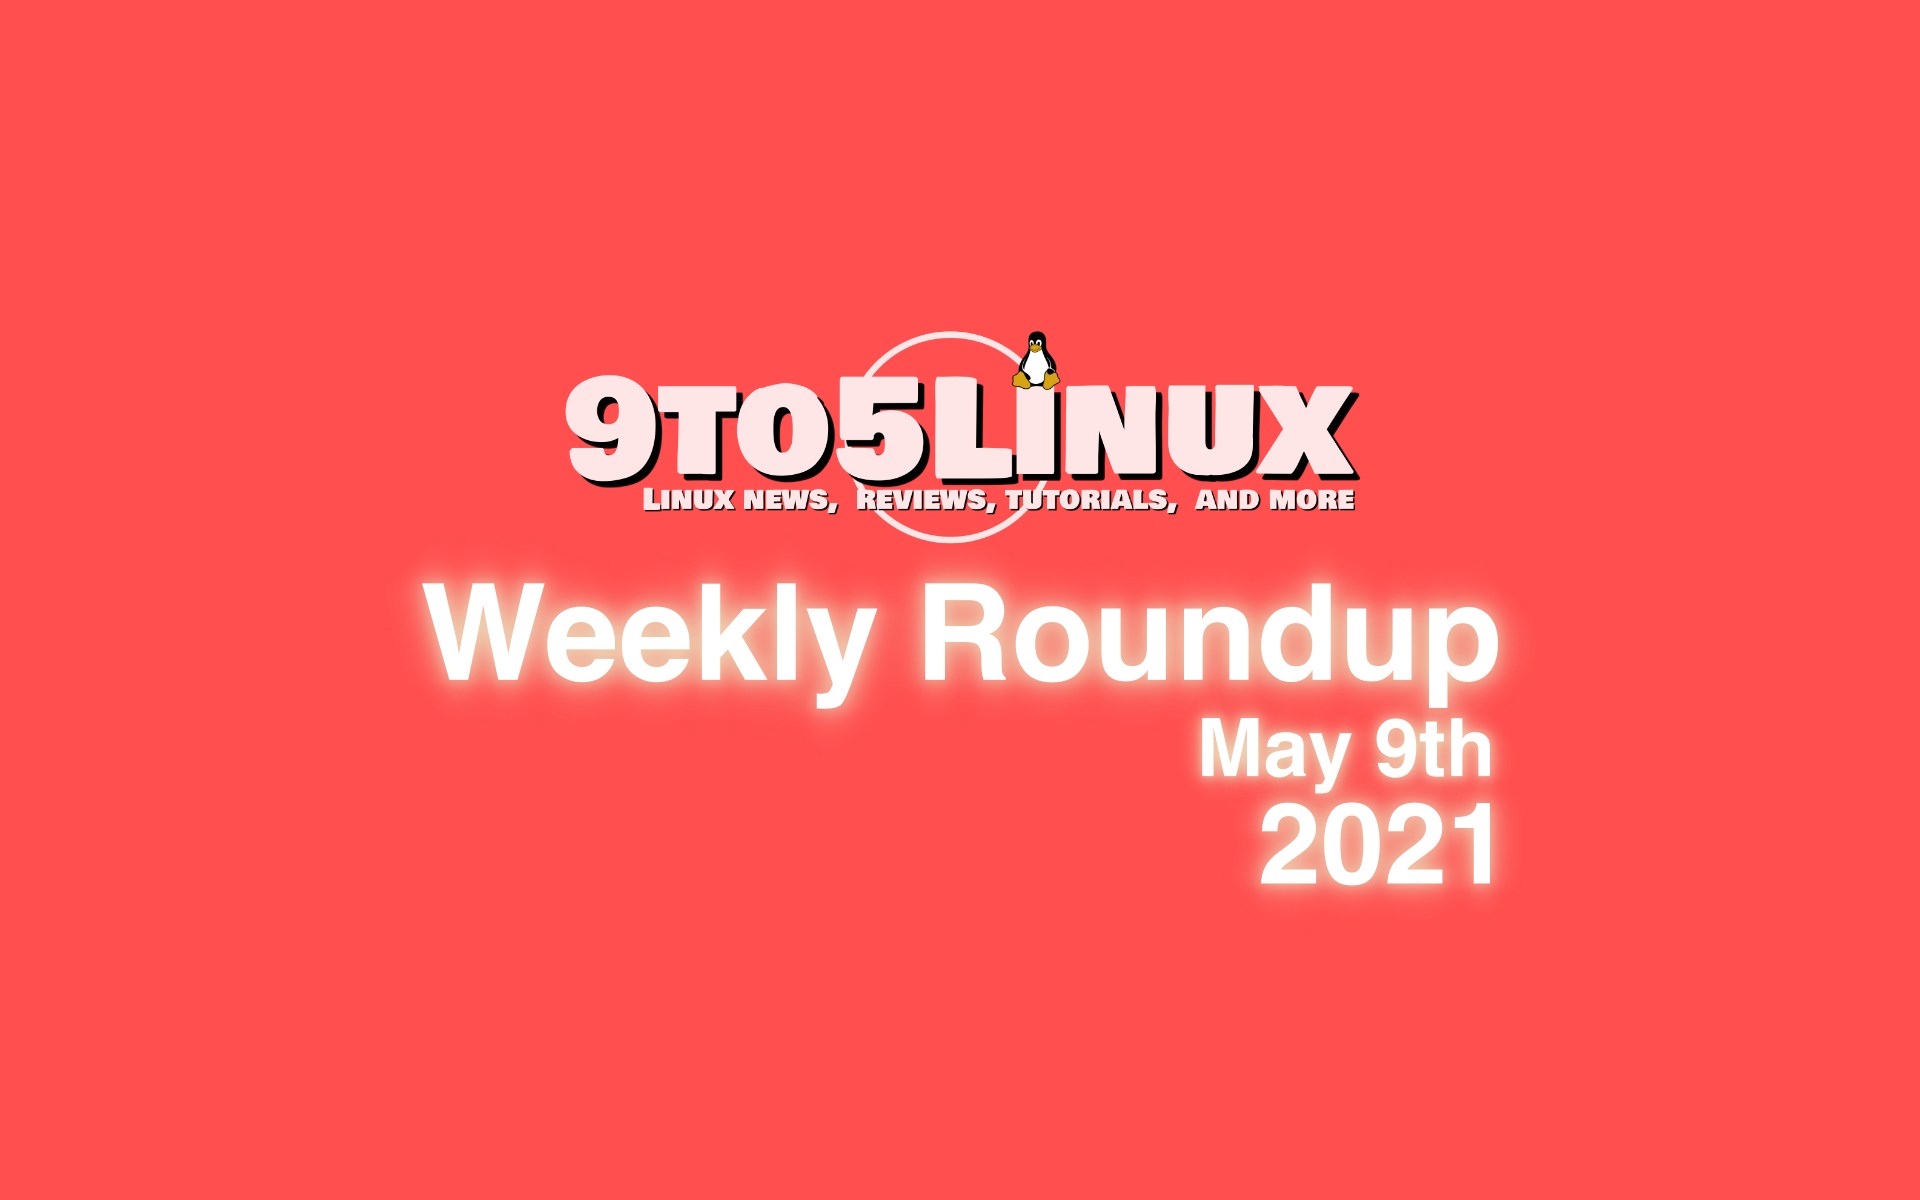 9to5Linux Weekly Roundup: May 9th, 2021